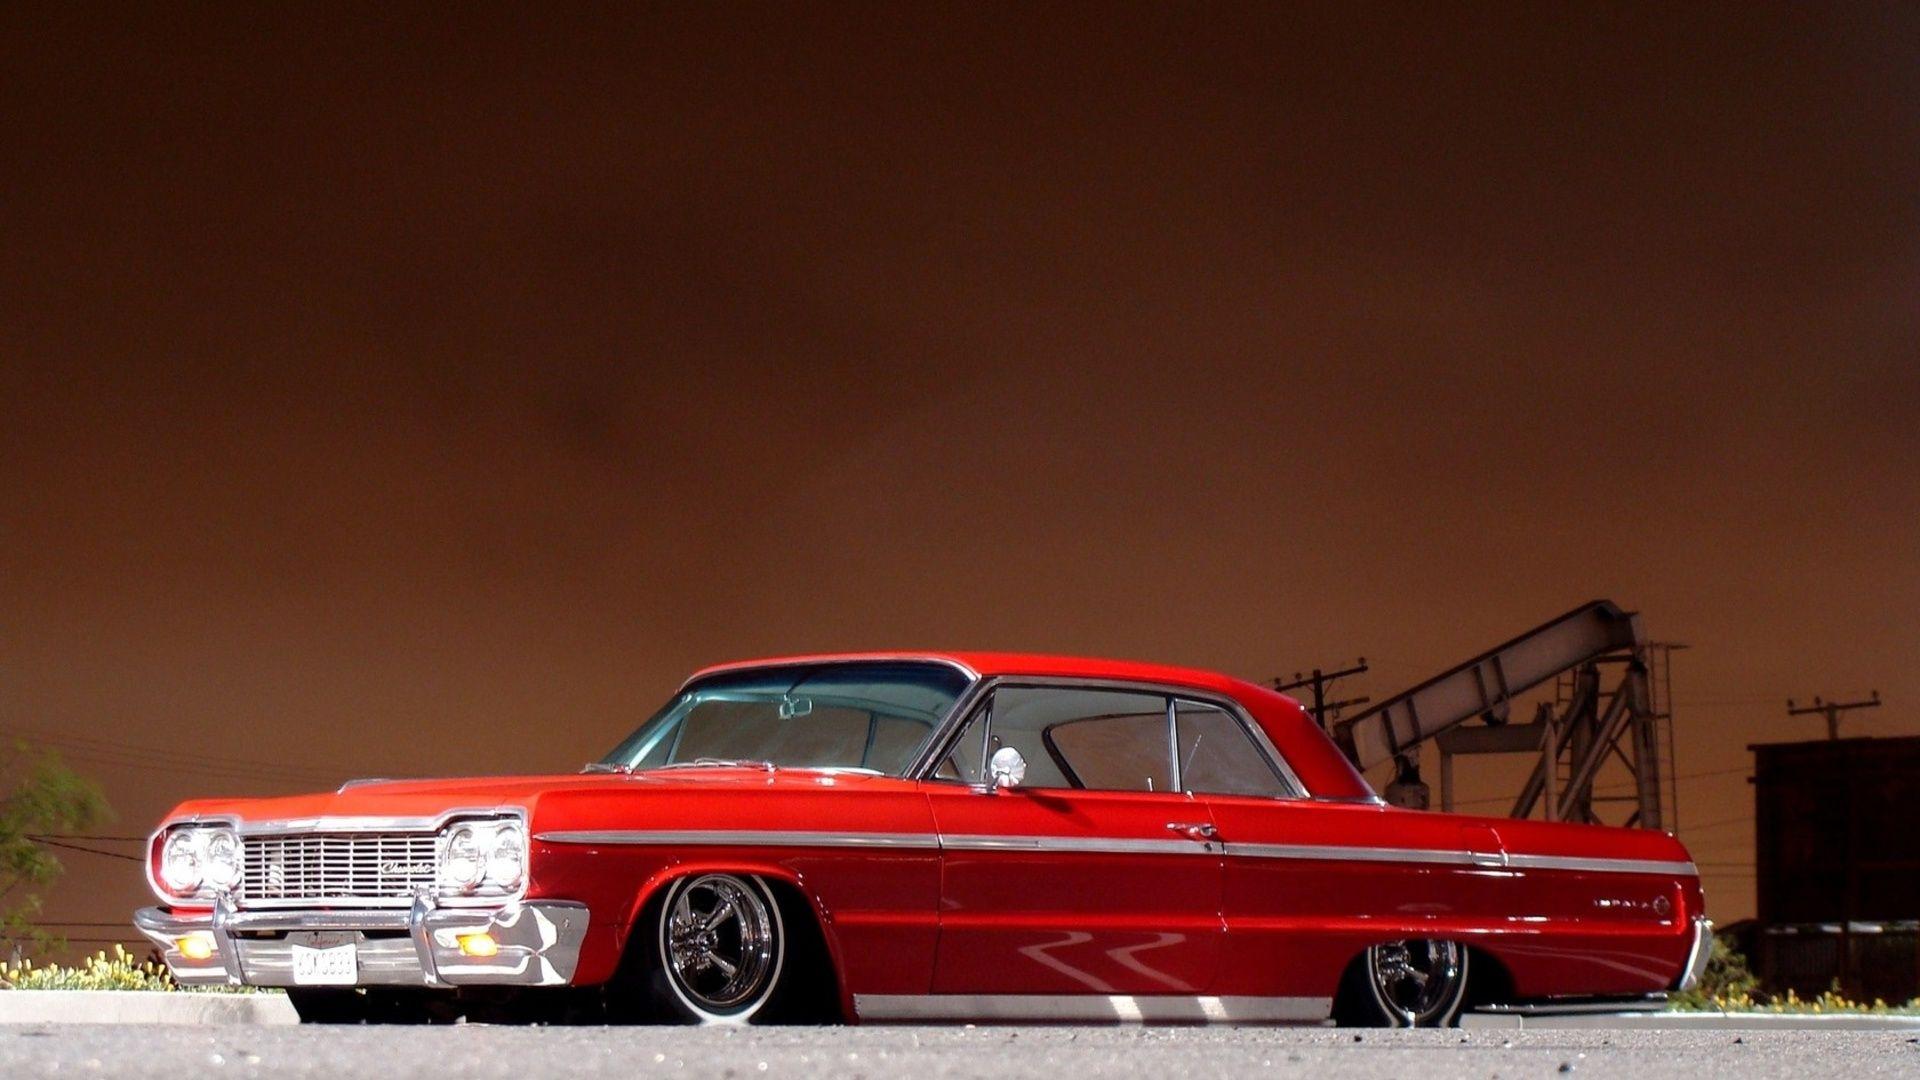 Chevrolet Impala Tuning Low Red Classic Muscle Cars Wallpaper